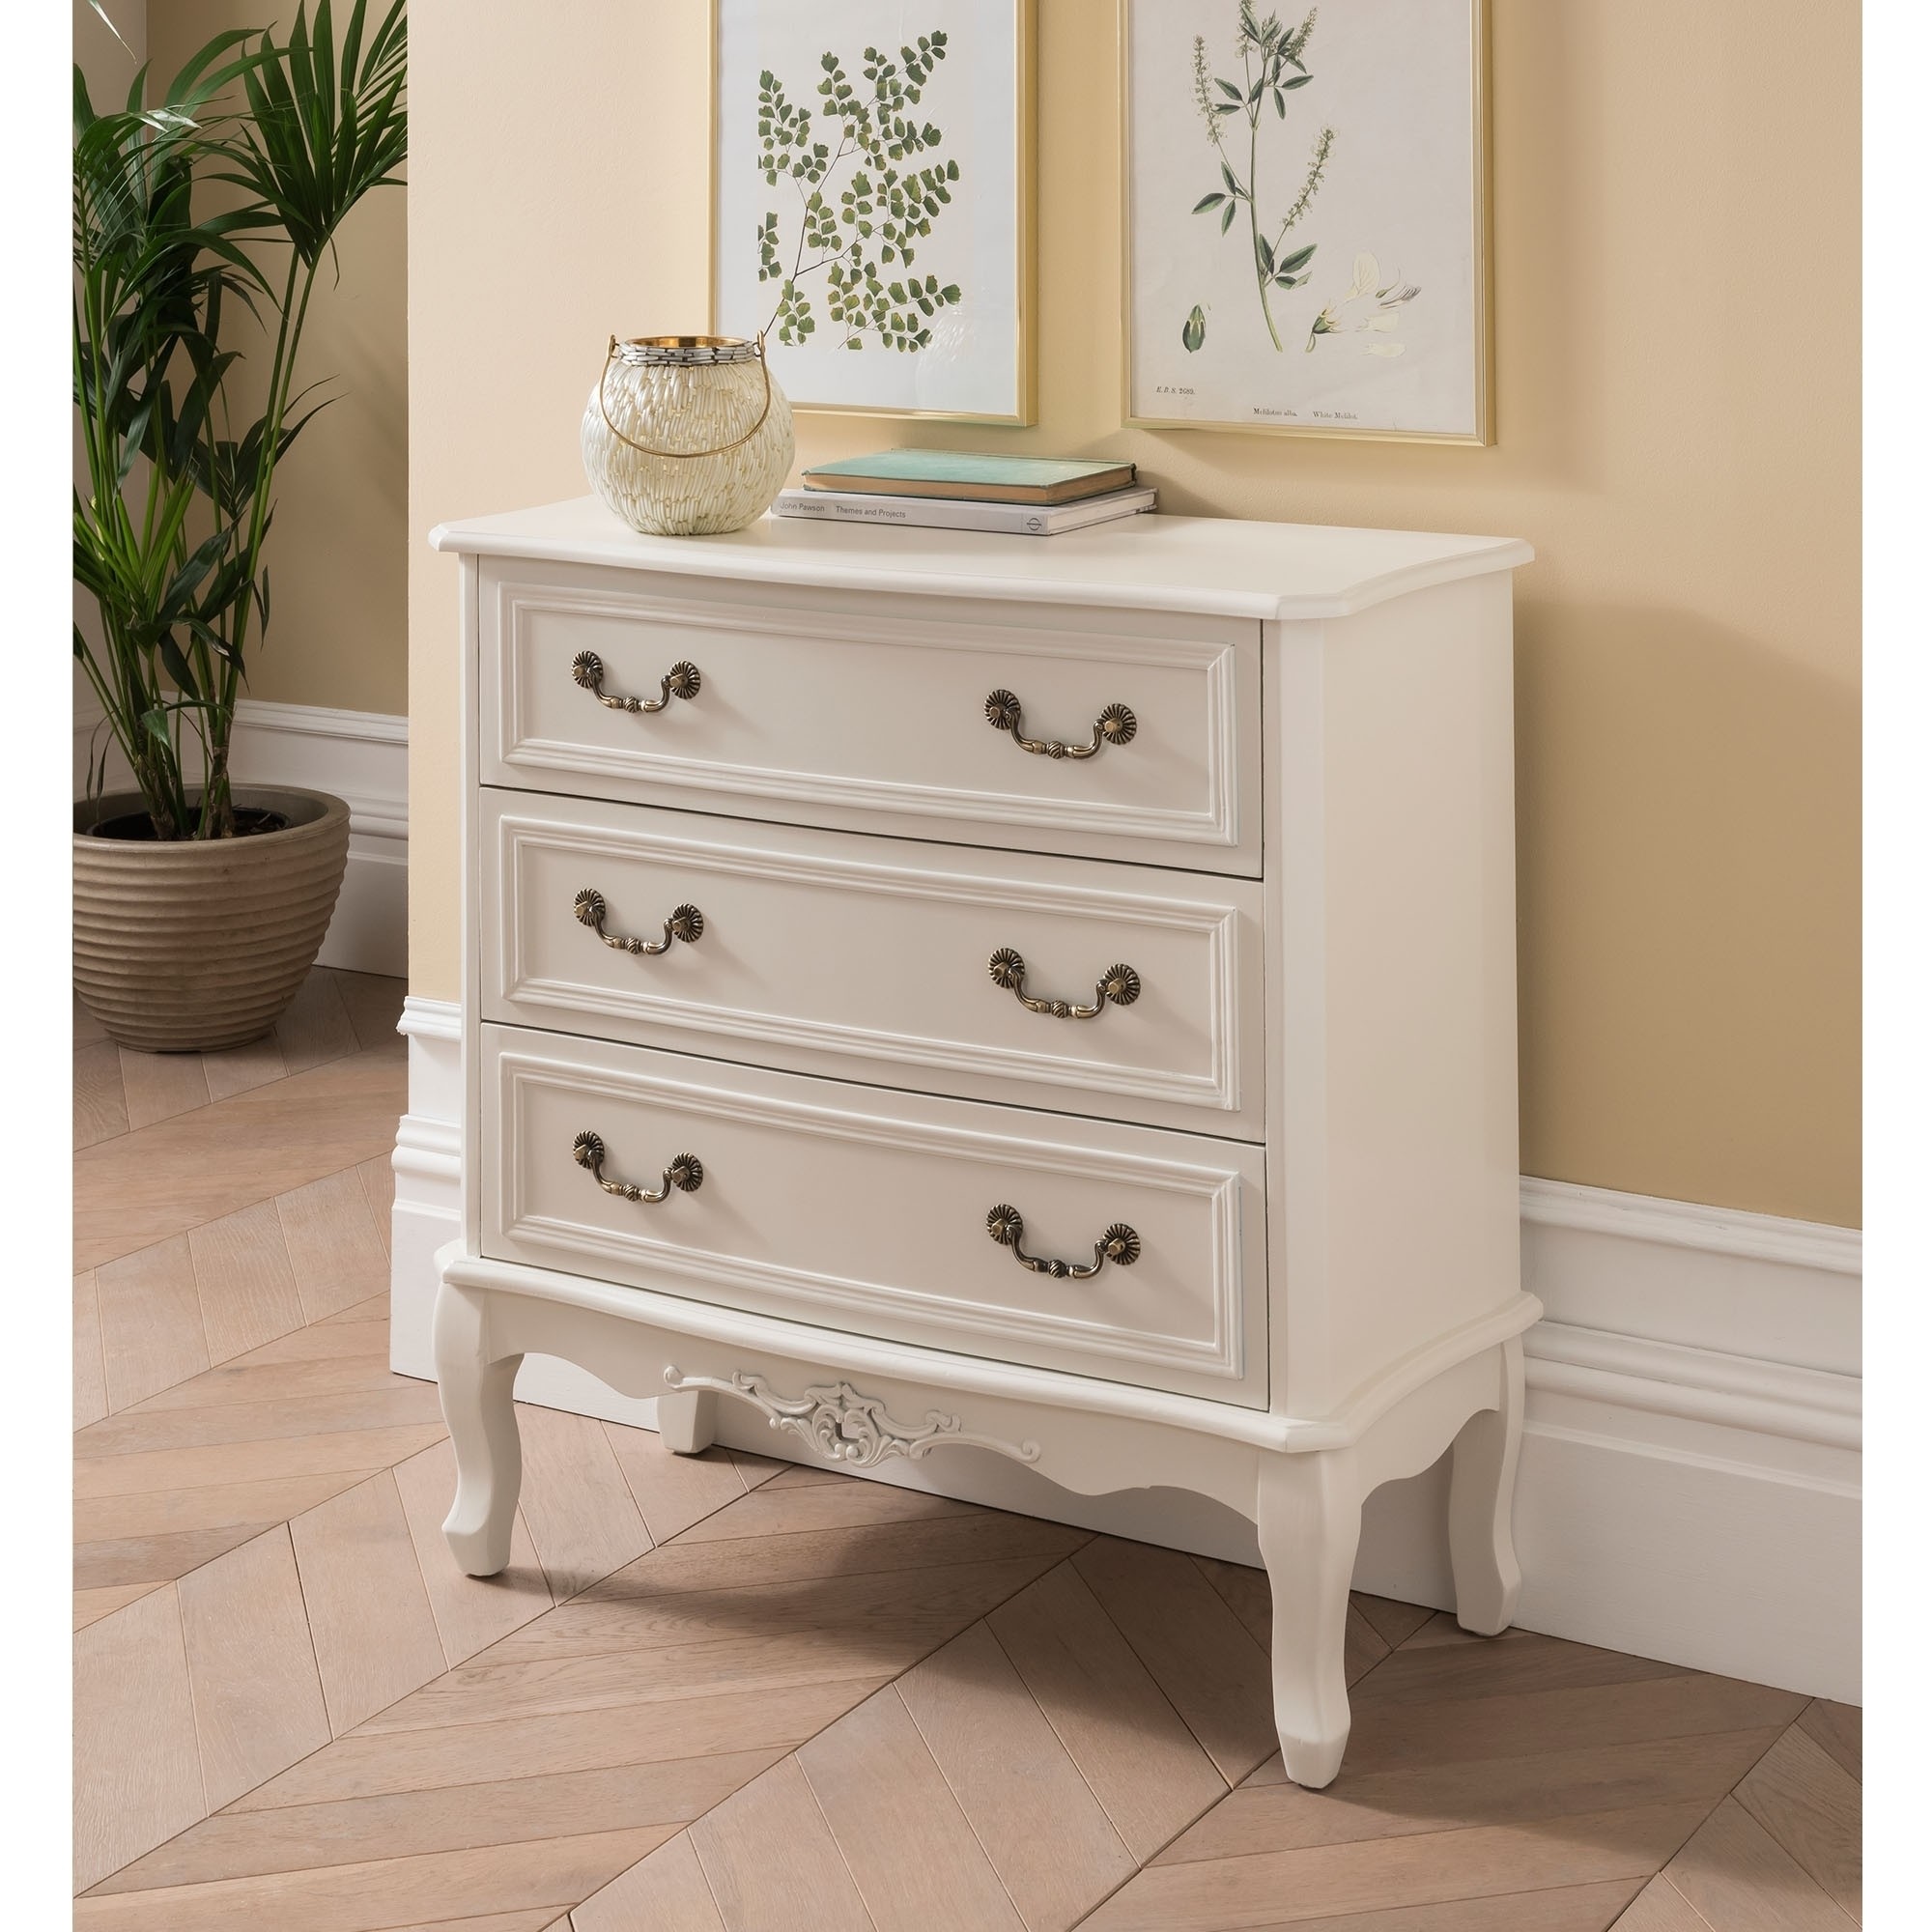 Etienne white 3 drawer antique french style chest of